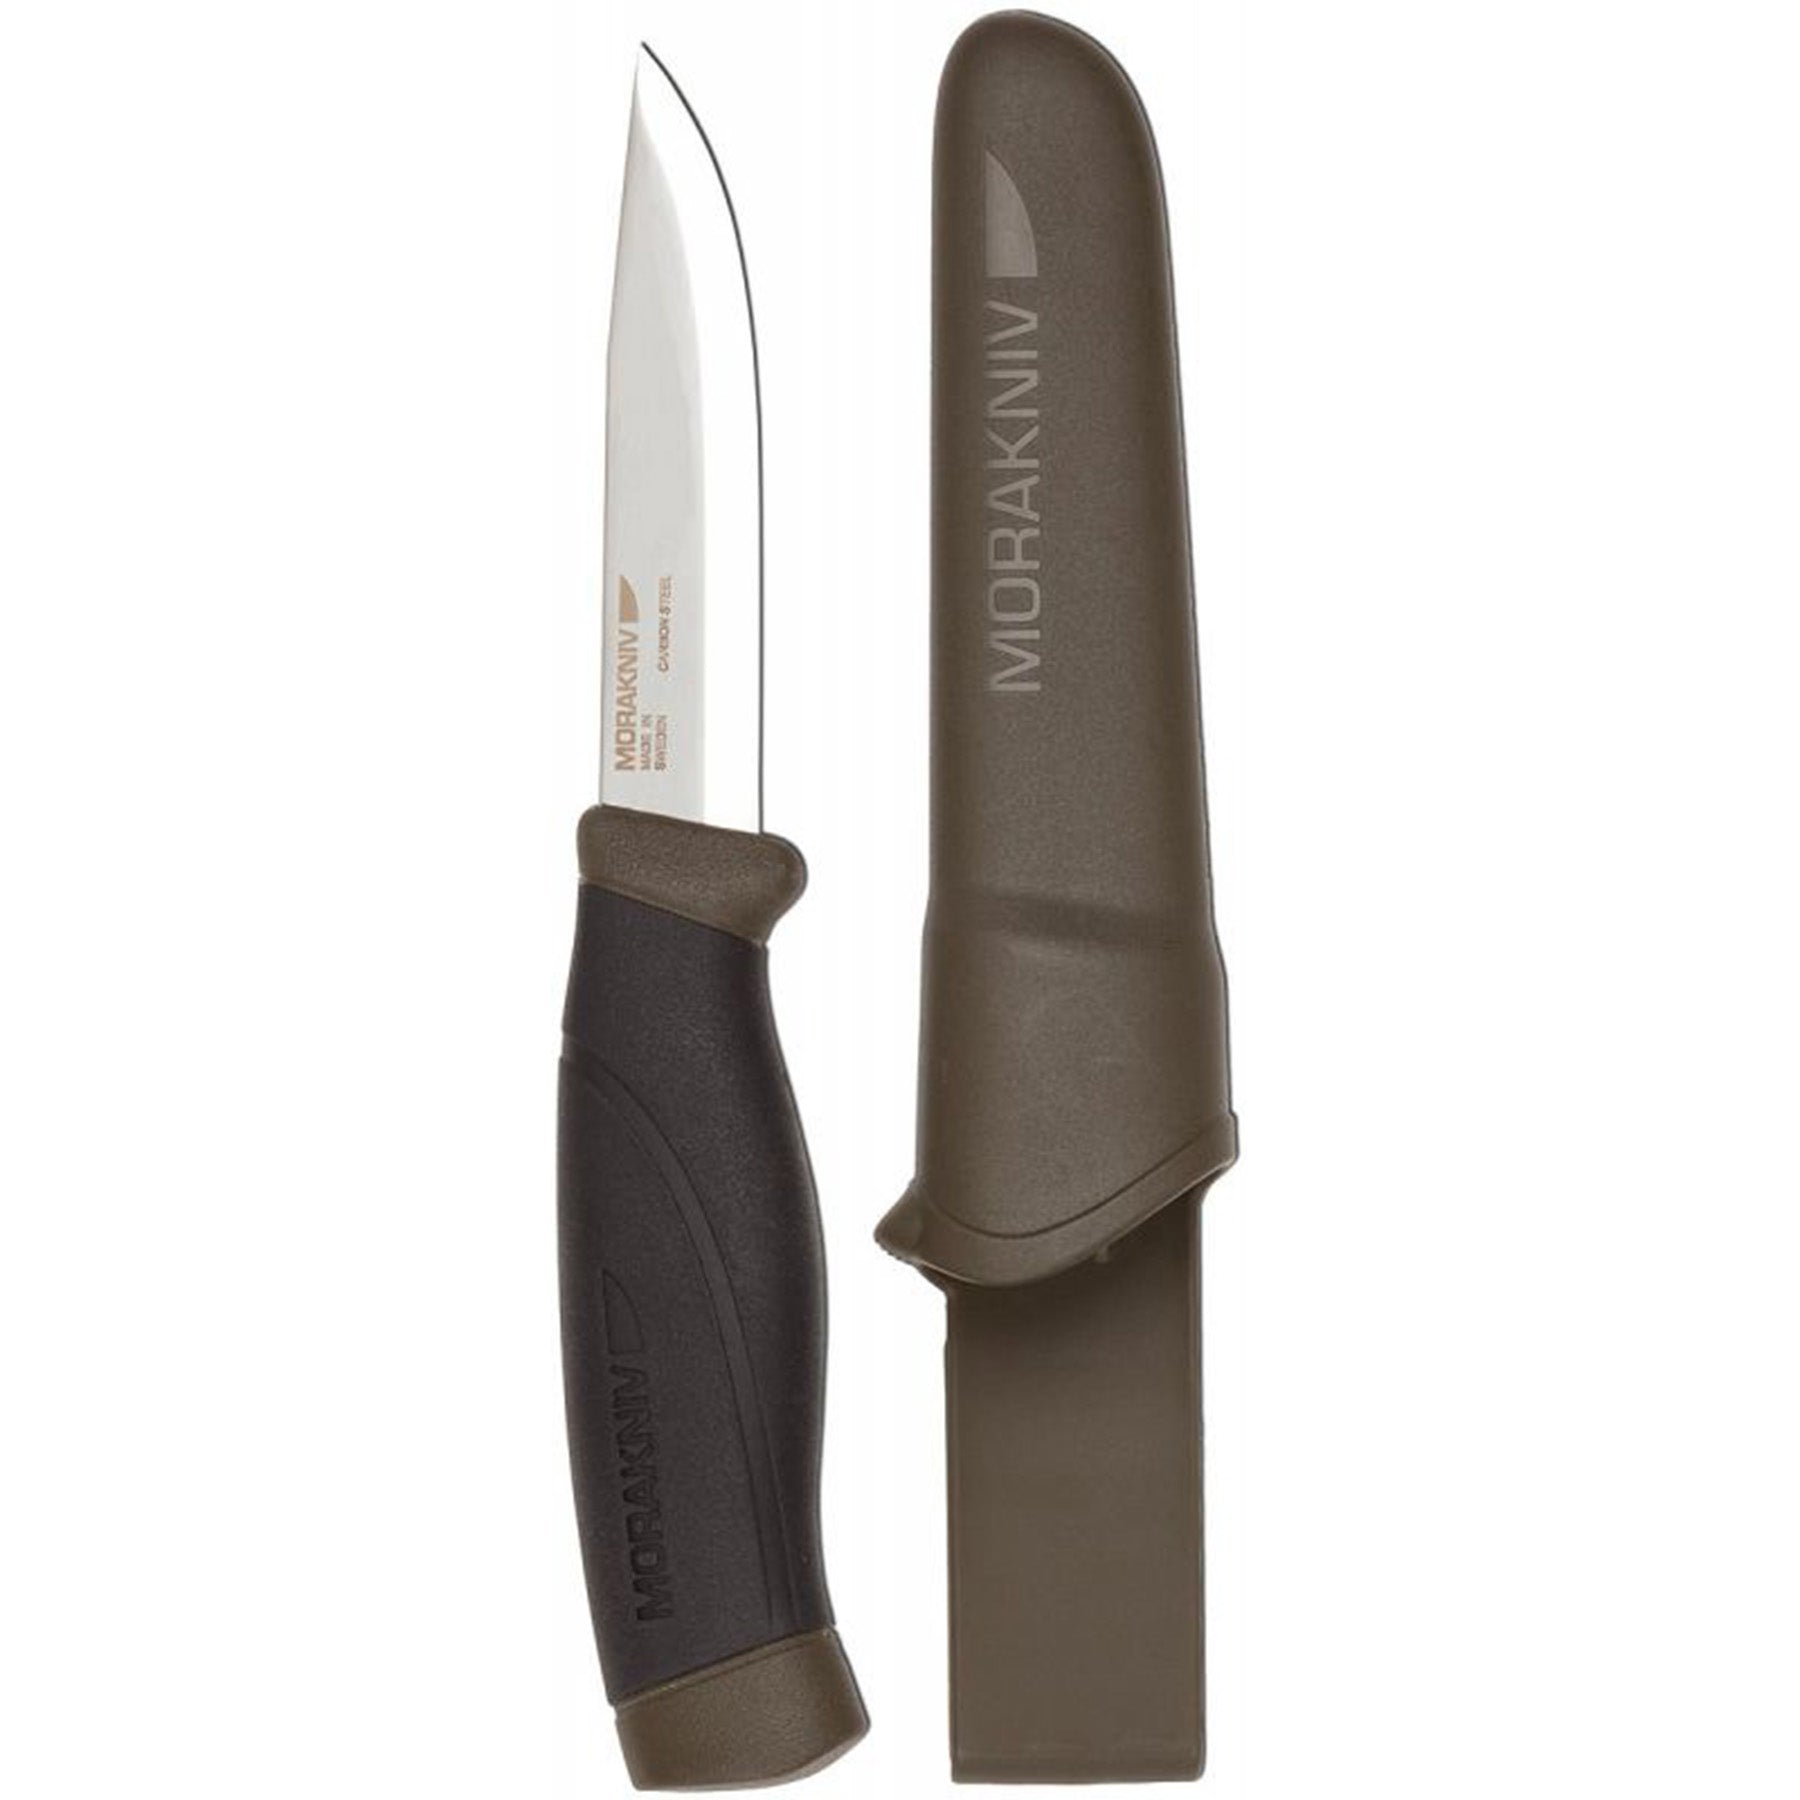 the companion knife is shown next to it's protective sheath